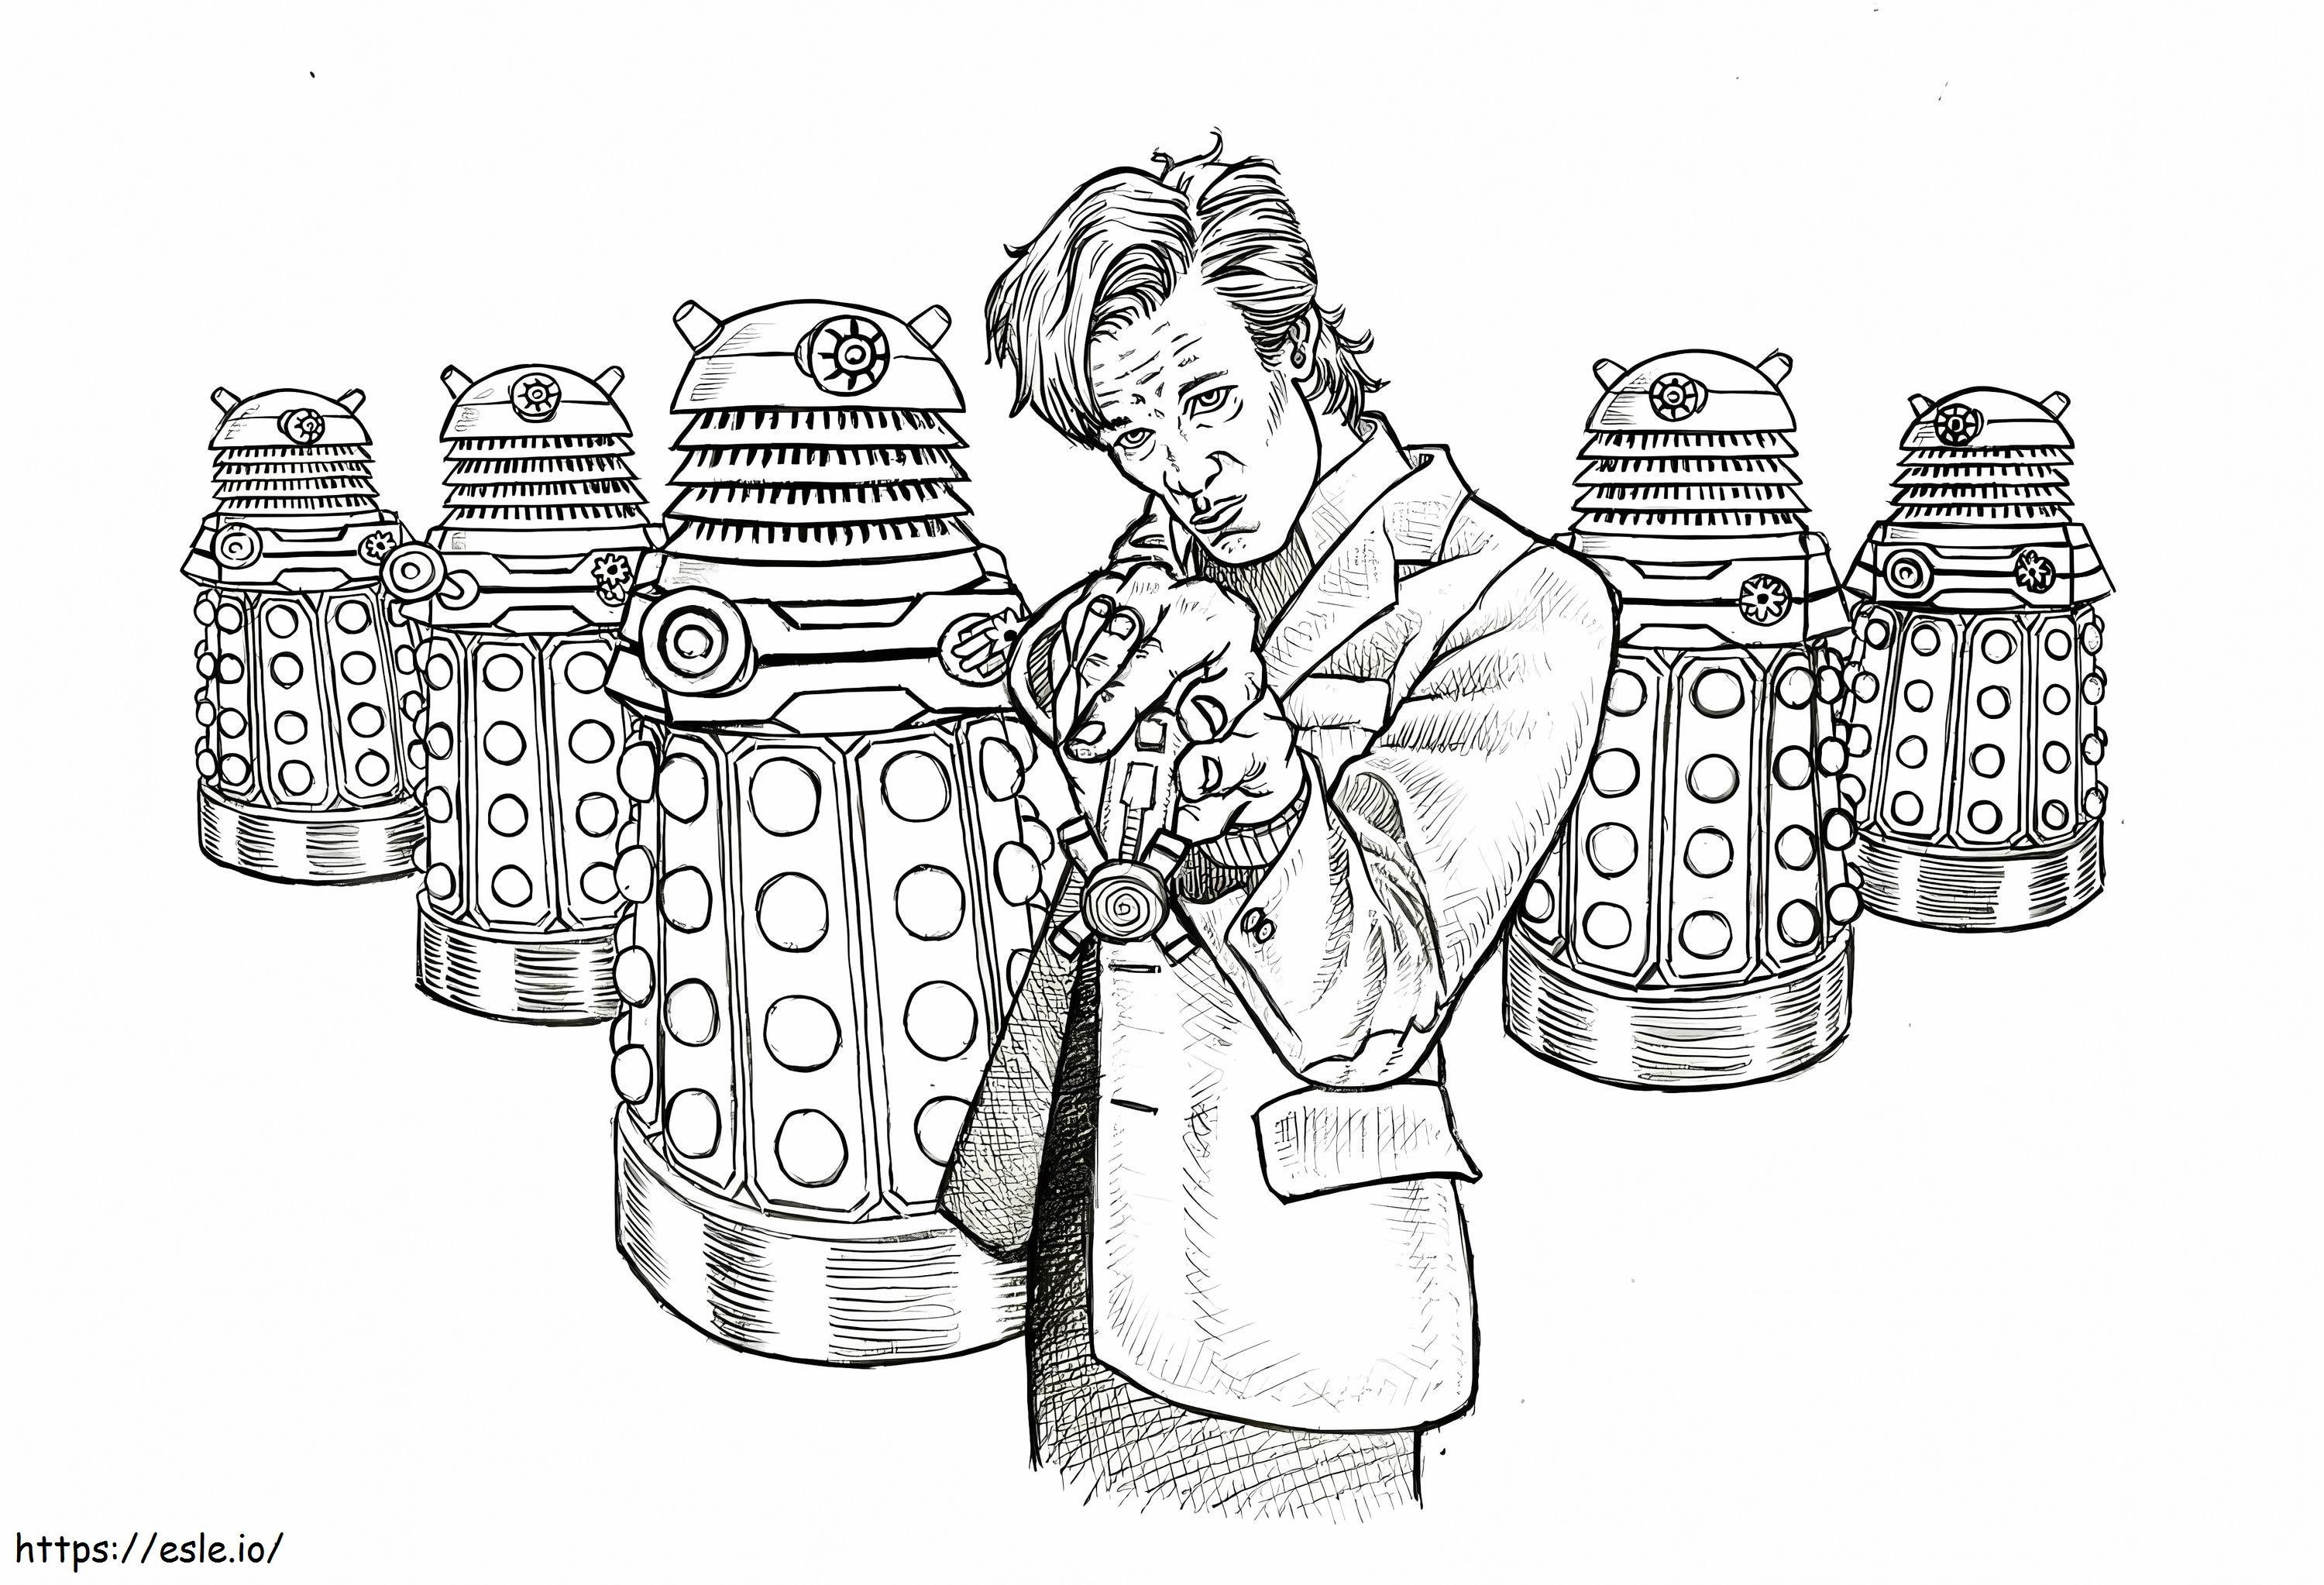 Doctor Who 5 coloring page